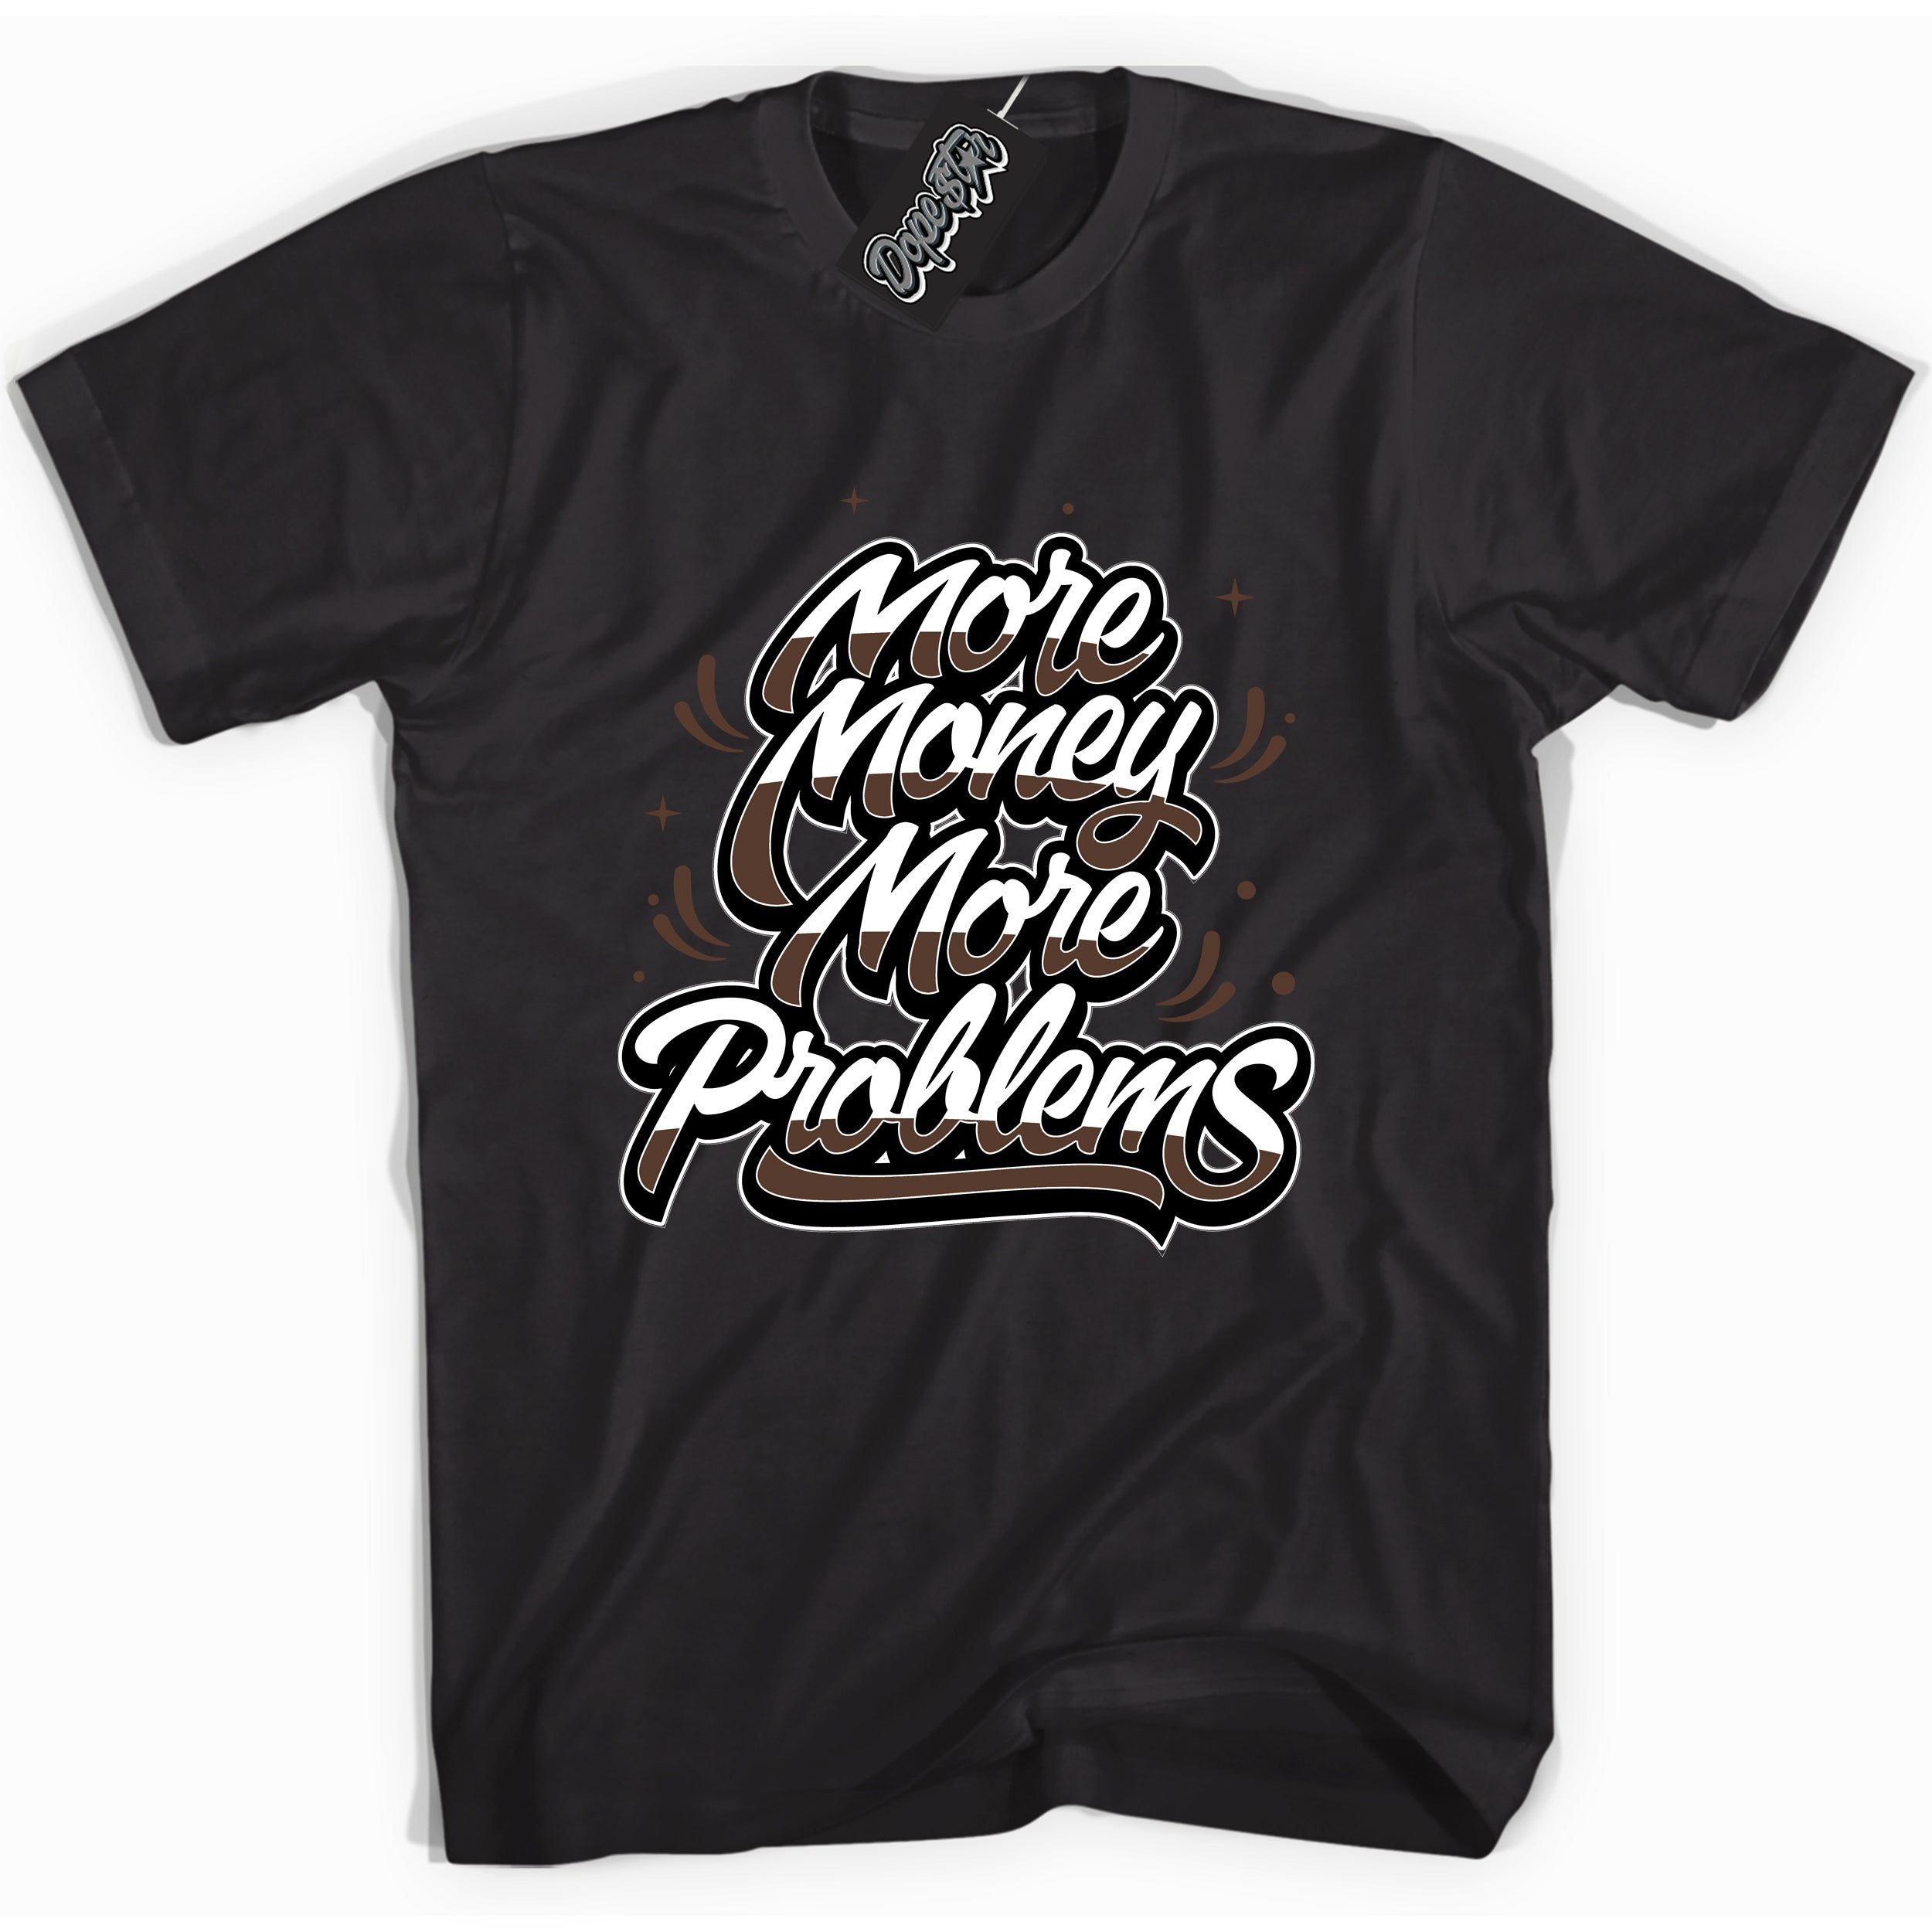 Cool Black graphic tee with “ More Money More Problems ” design, that perfectly matches Palomino 1s sneakers 